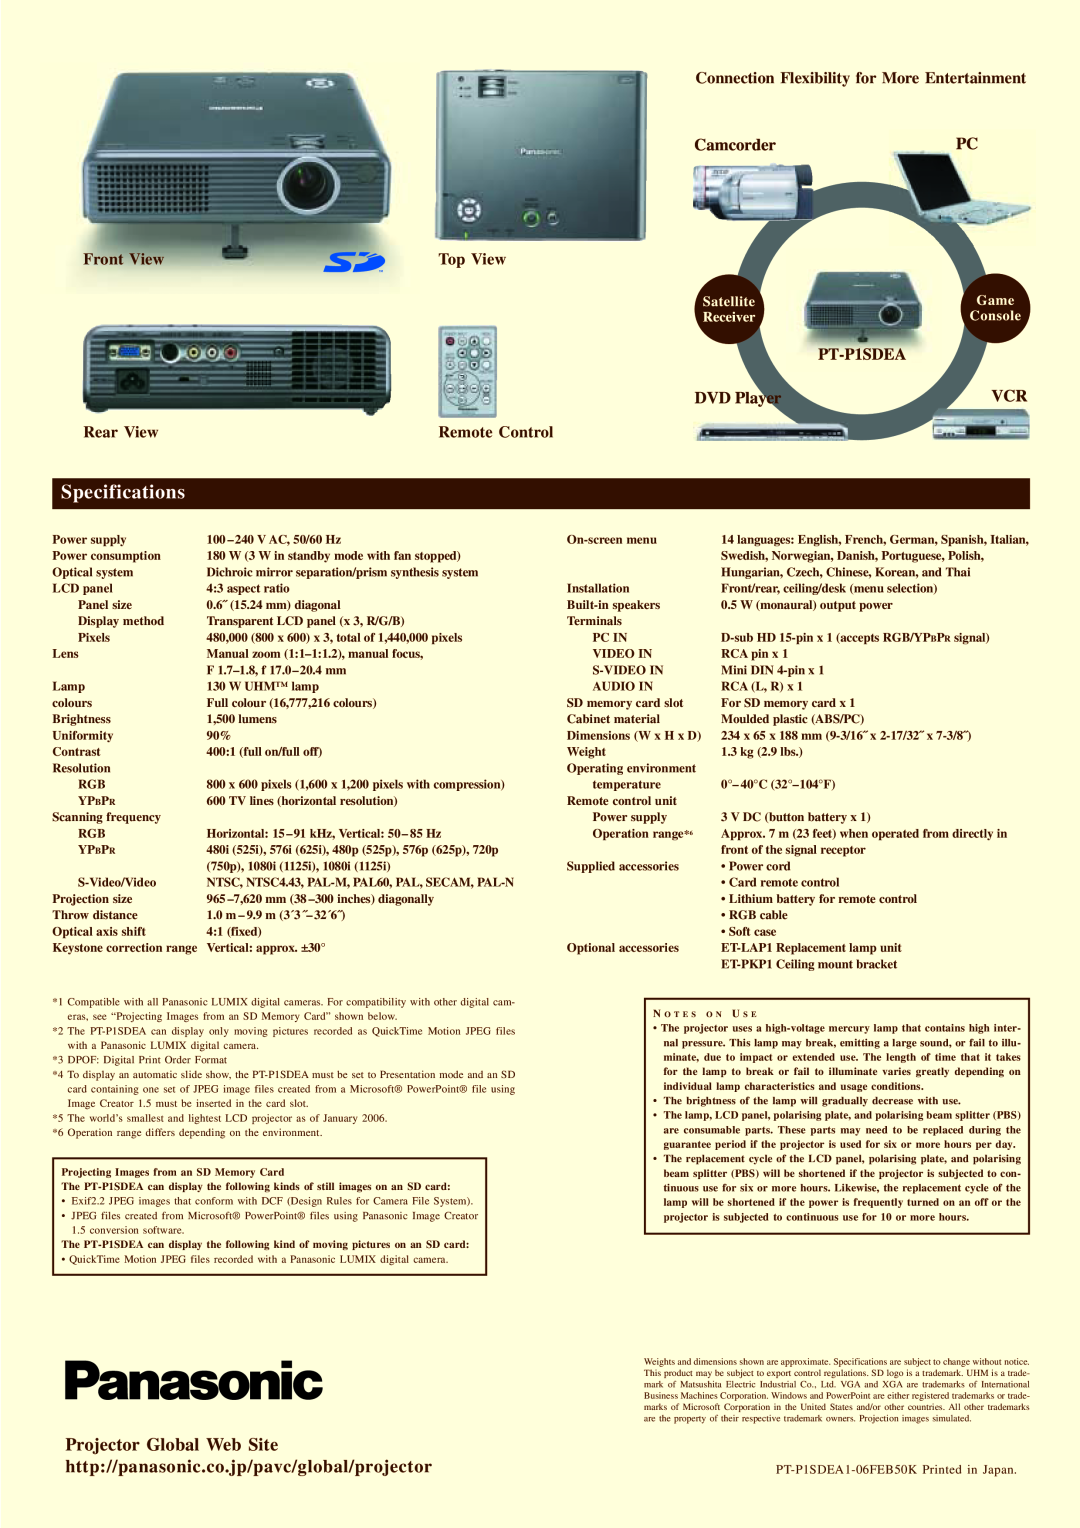 Panasonic pt-p1sdea Specifications, Projector Global Web Site http//panasonic.co.jp/pavc/global/projector, Front View 